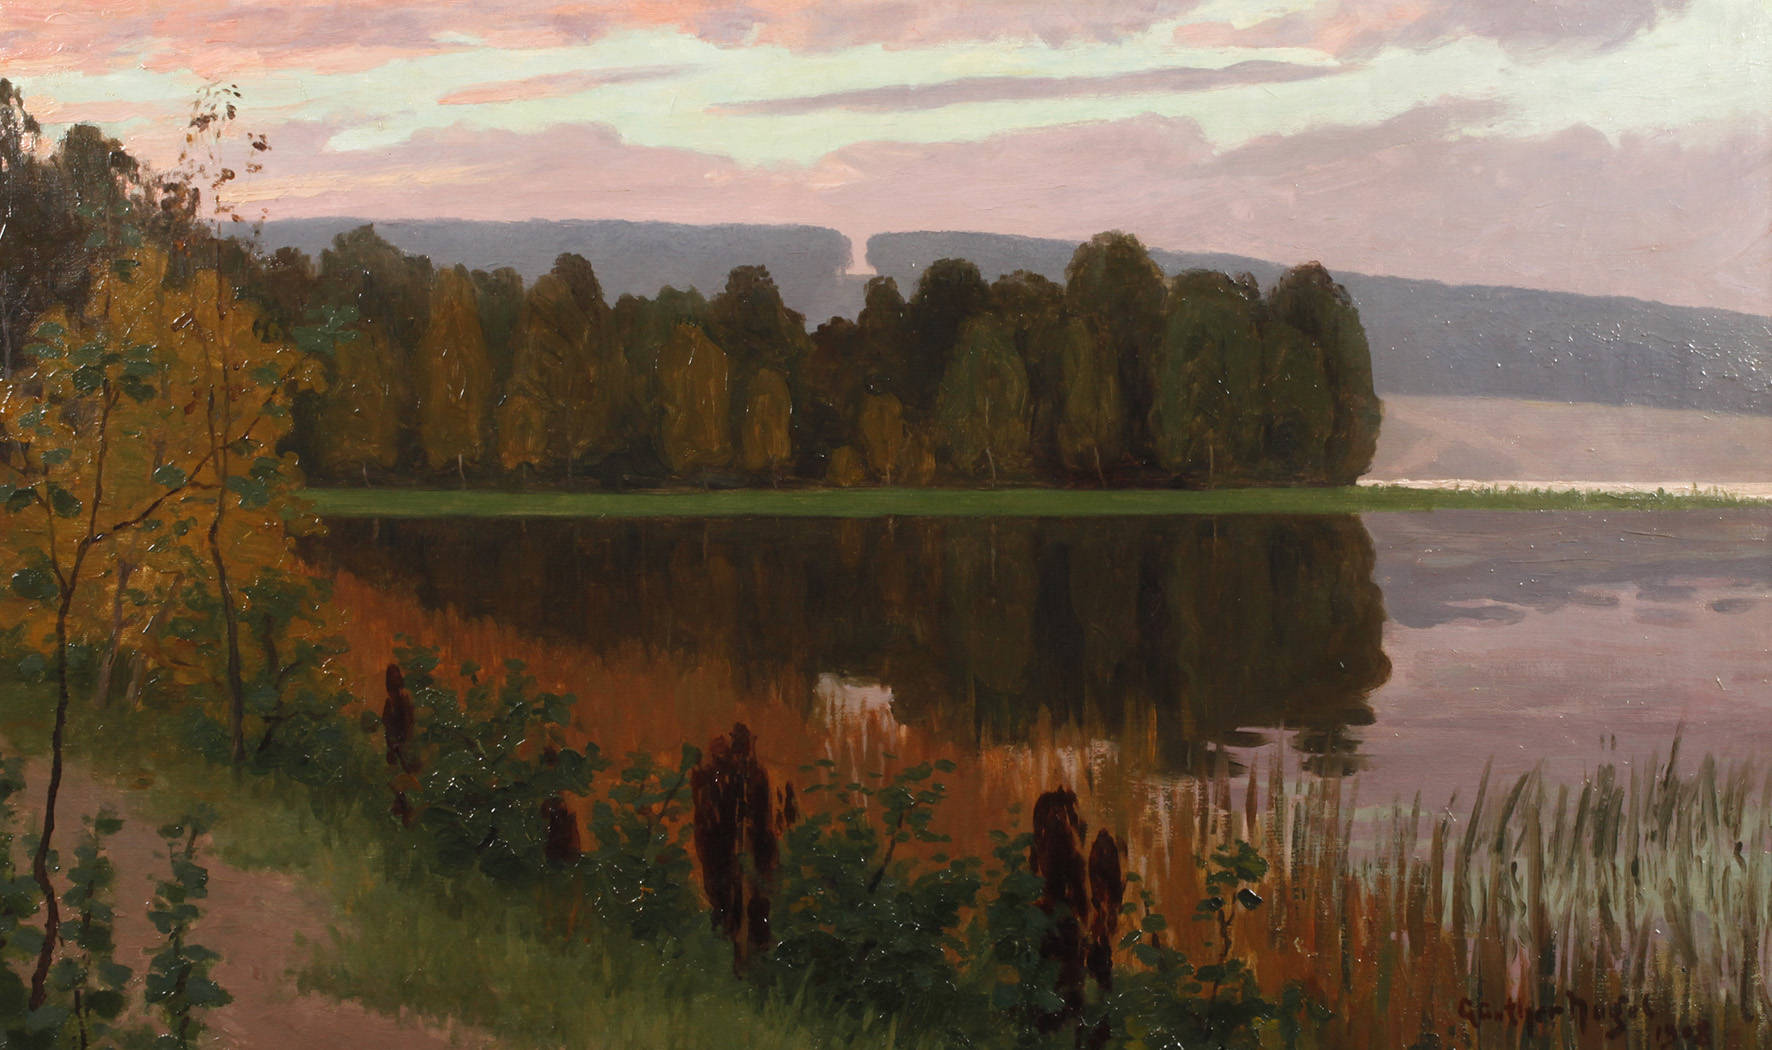 Günther Nagel, Abend am See